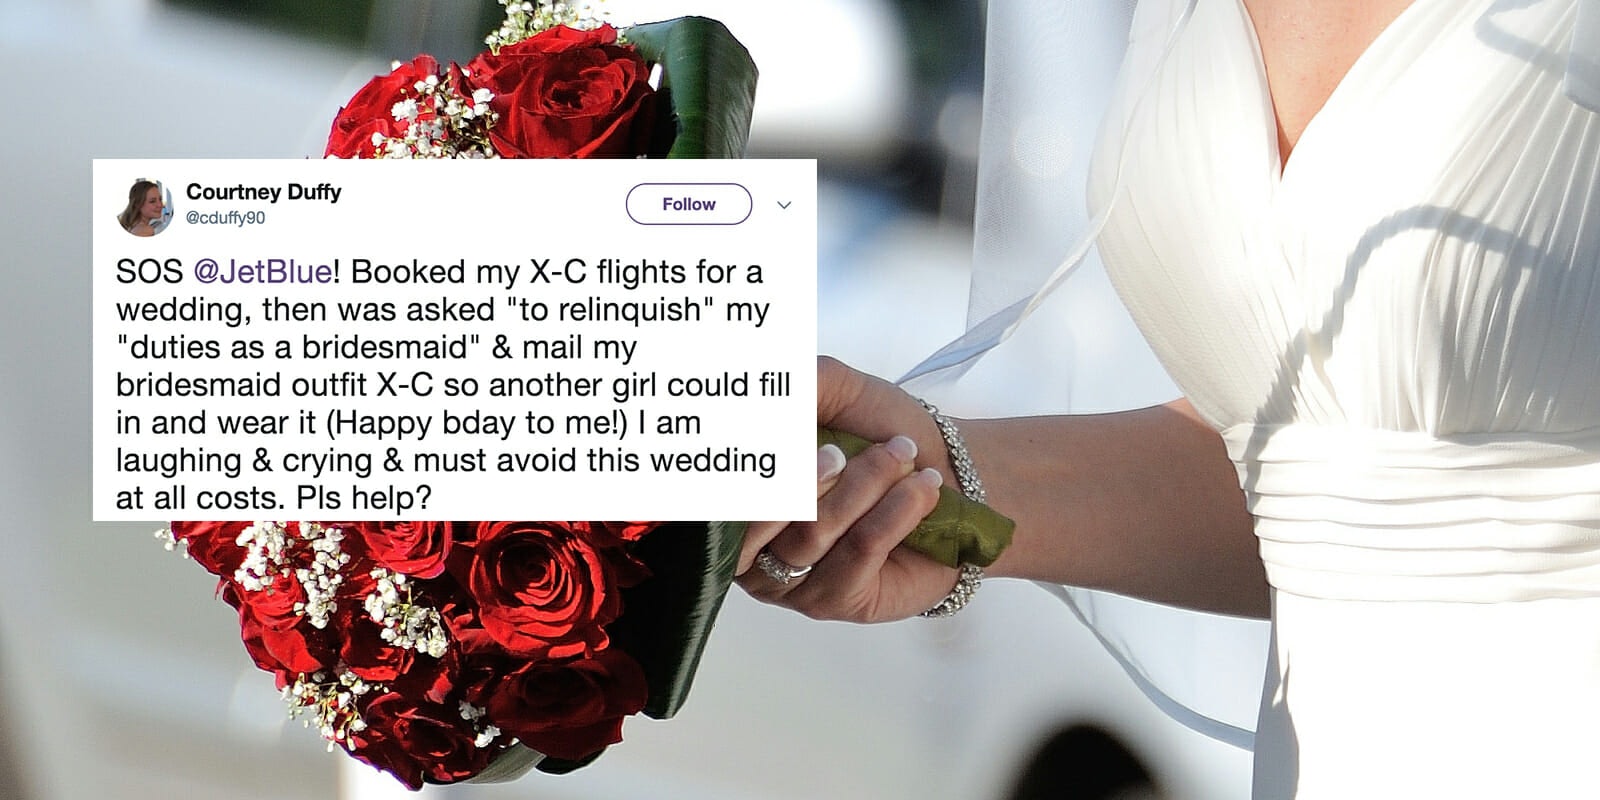 Bridesmaid asks for plane ticket refund after getting dumped by the bride-to-be.